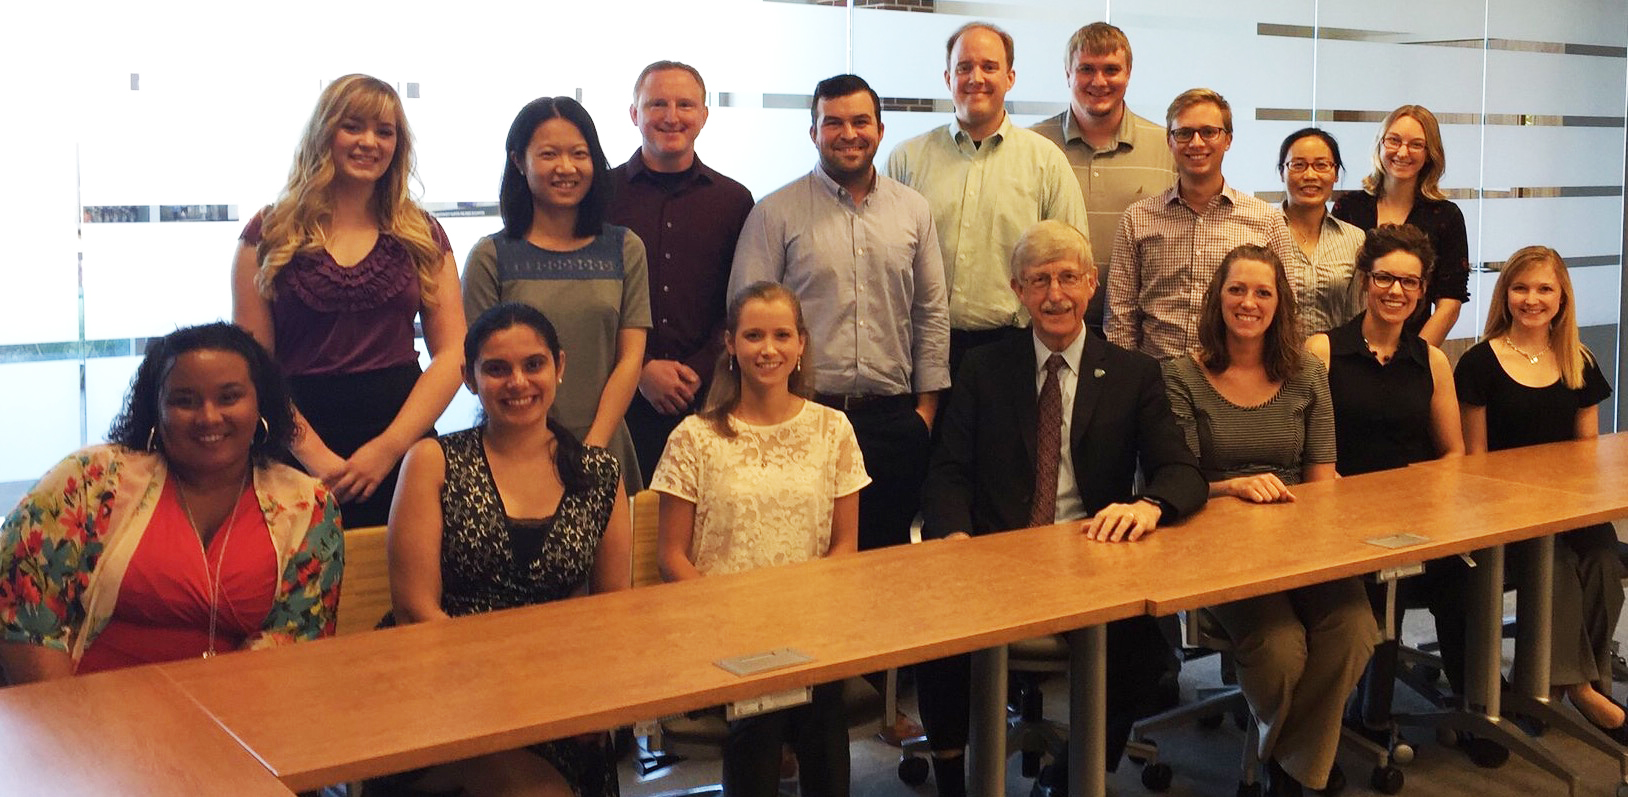 Dr. Francis Collins with current students and postdocs.